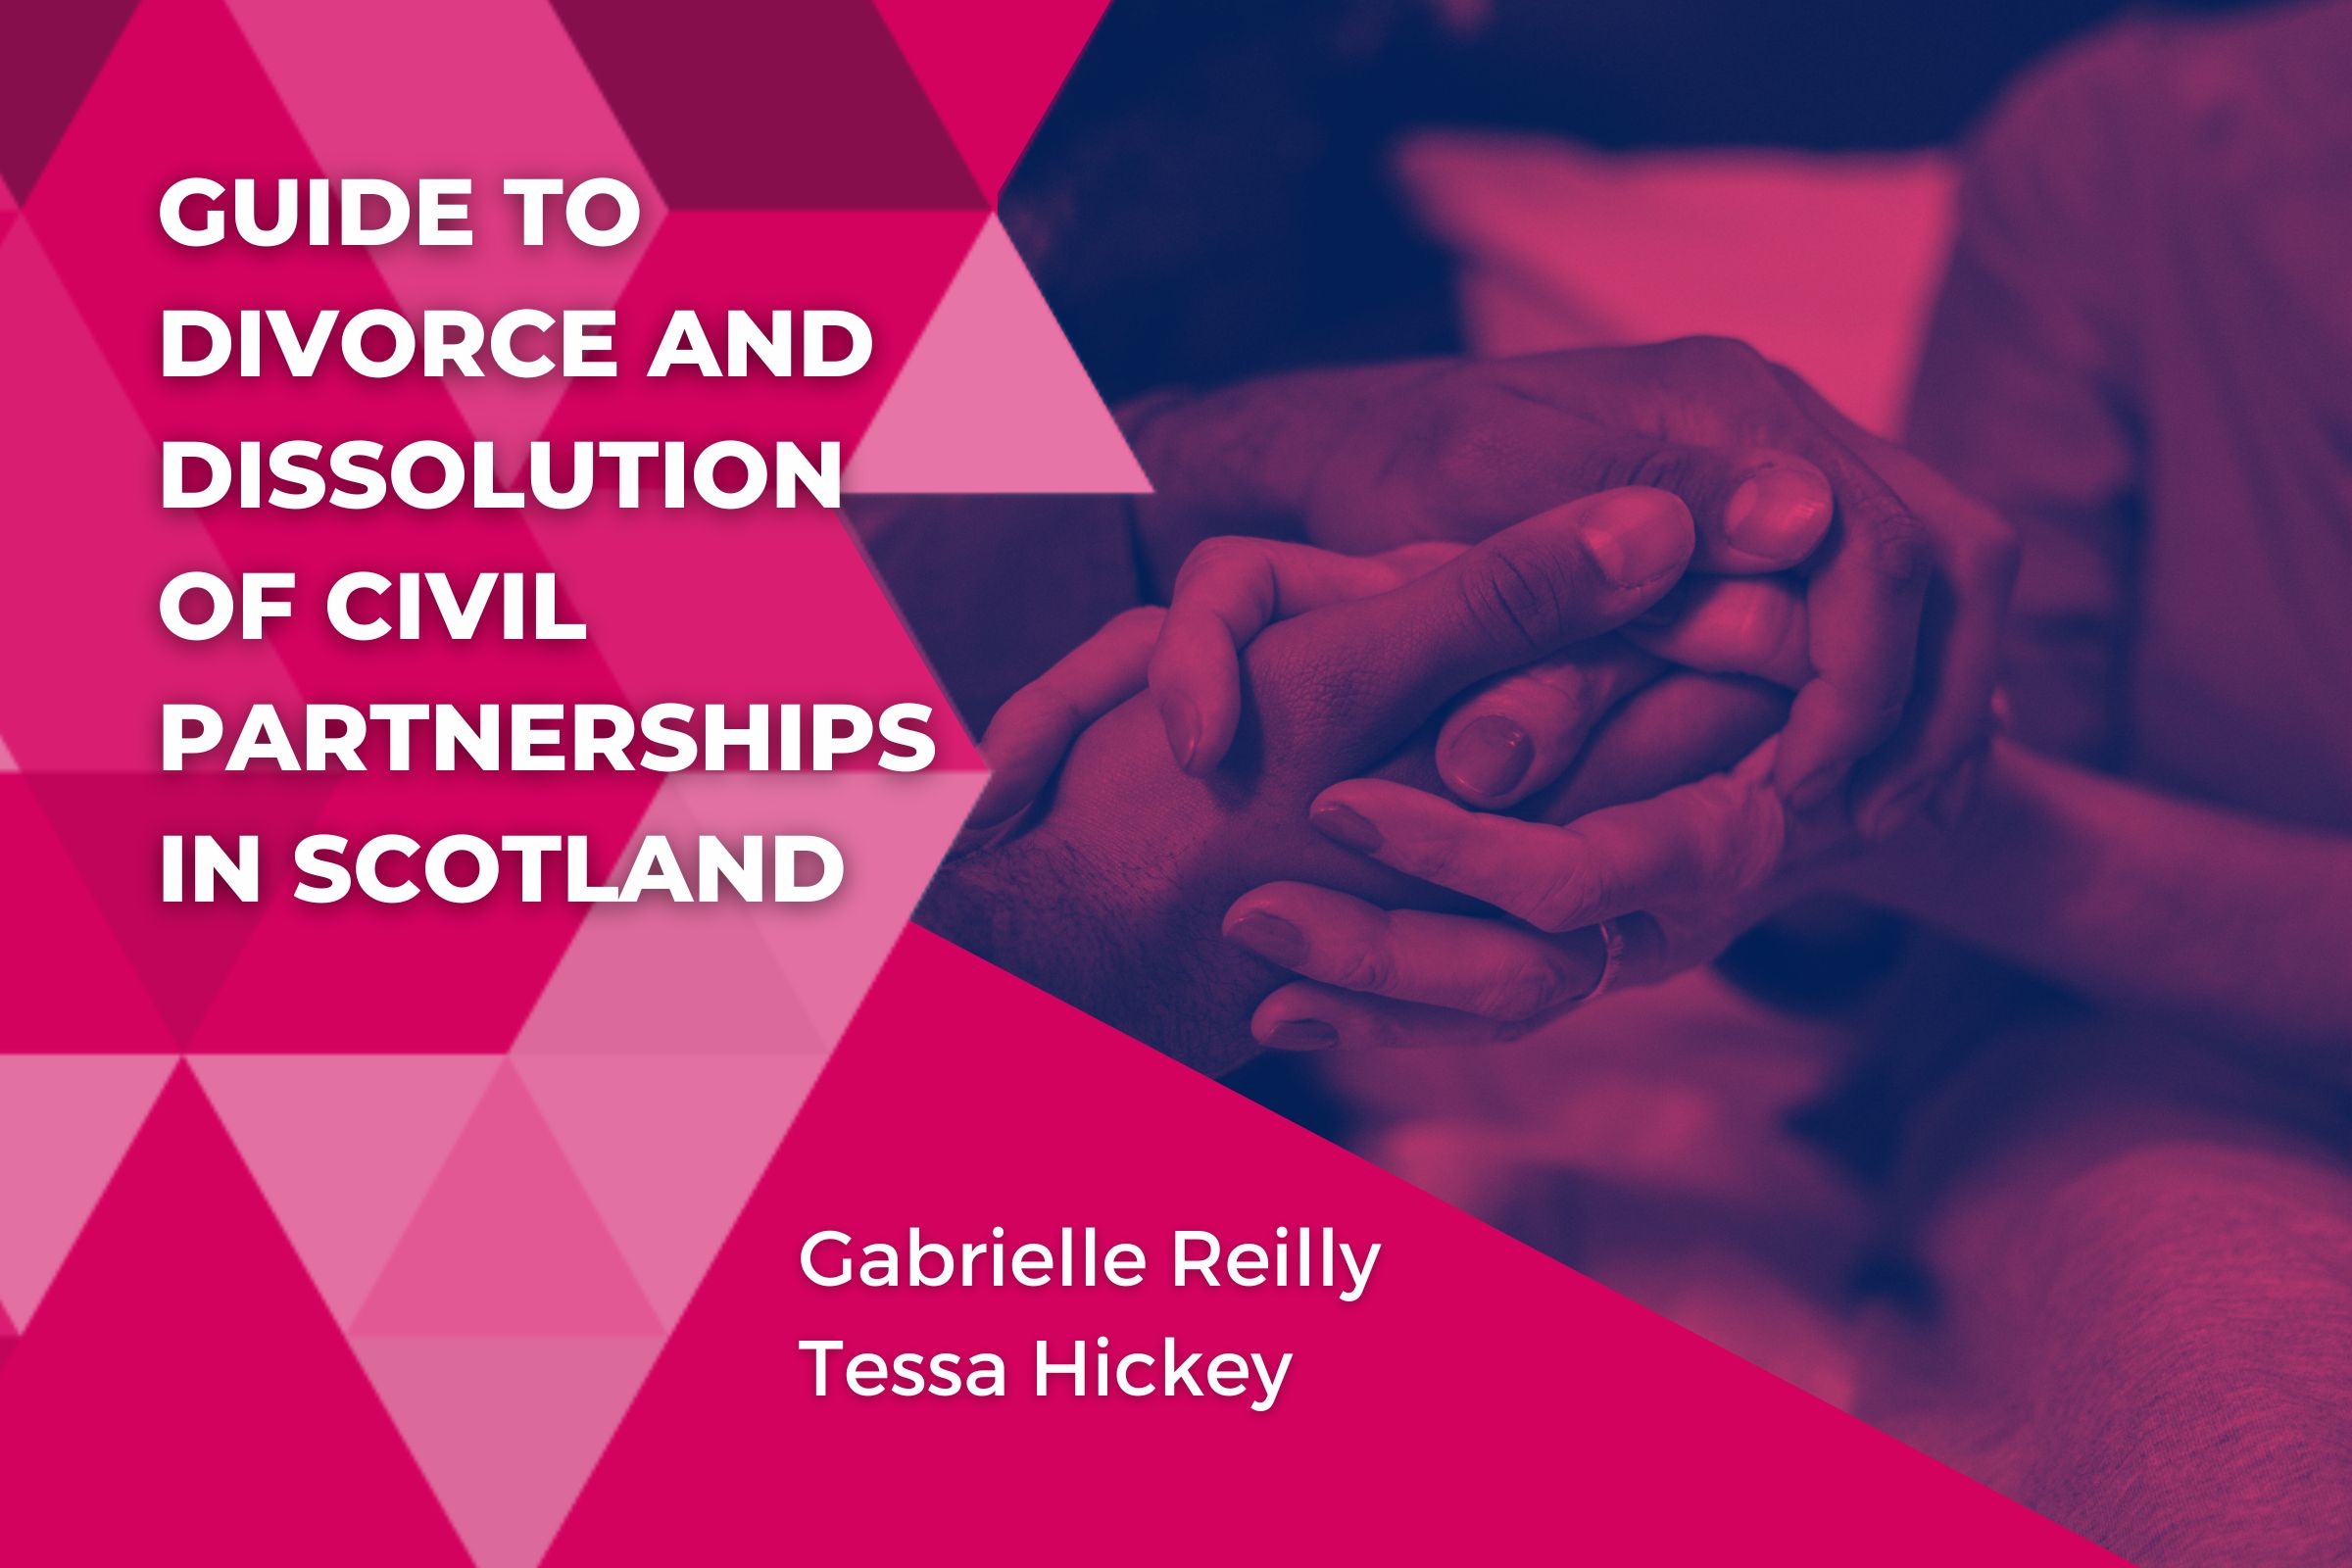 Guide to Divorce and Dissolution of Civil Partnerships in Scotland